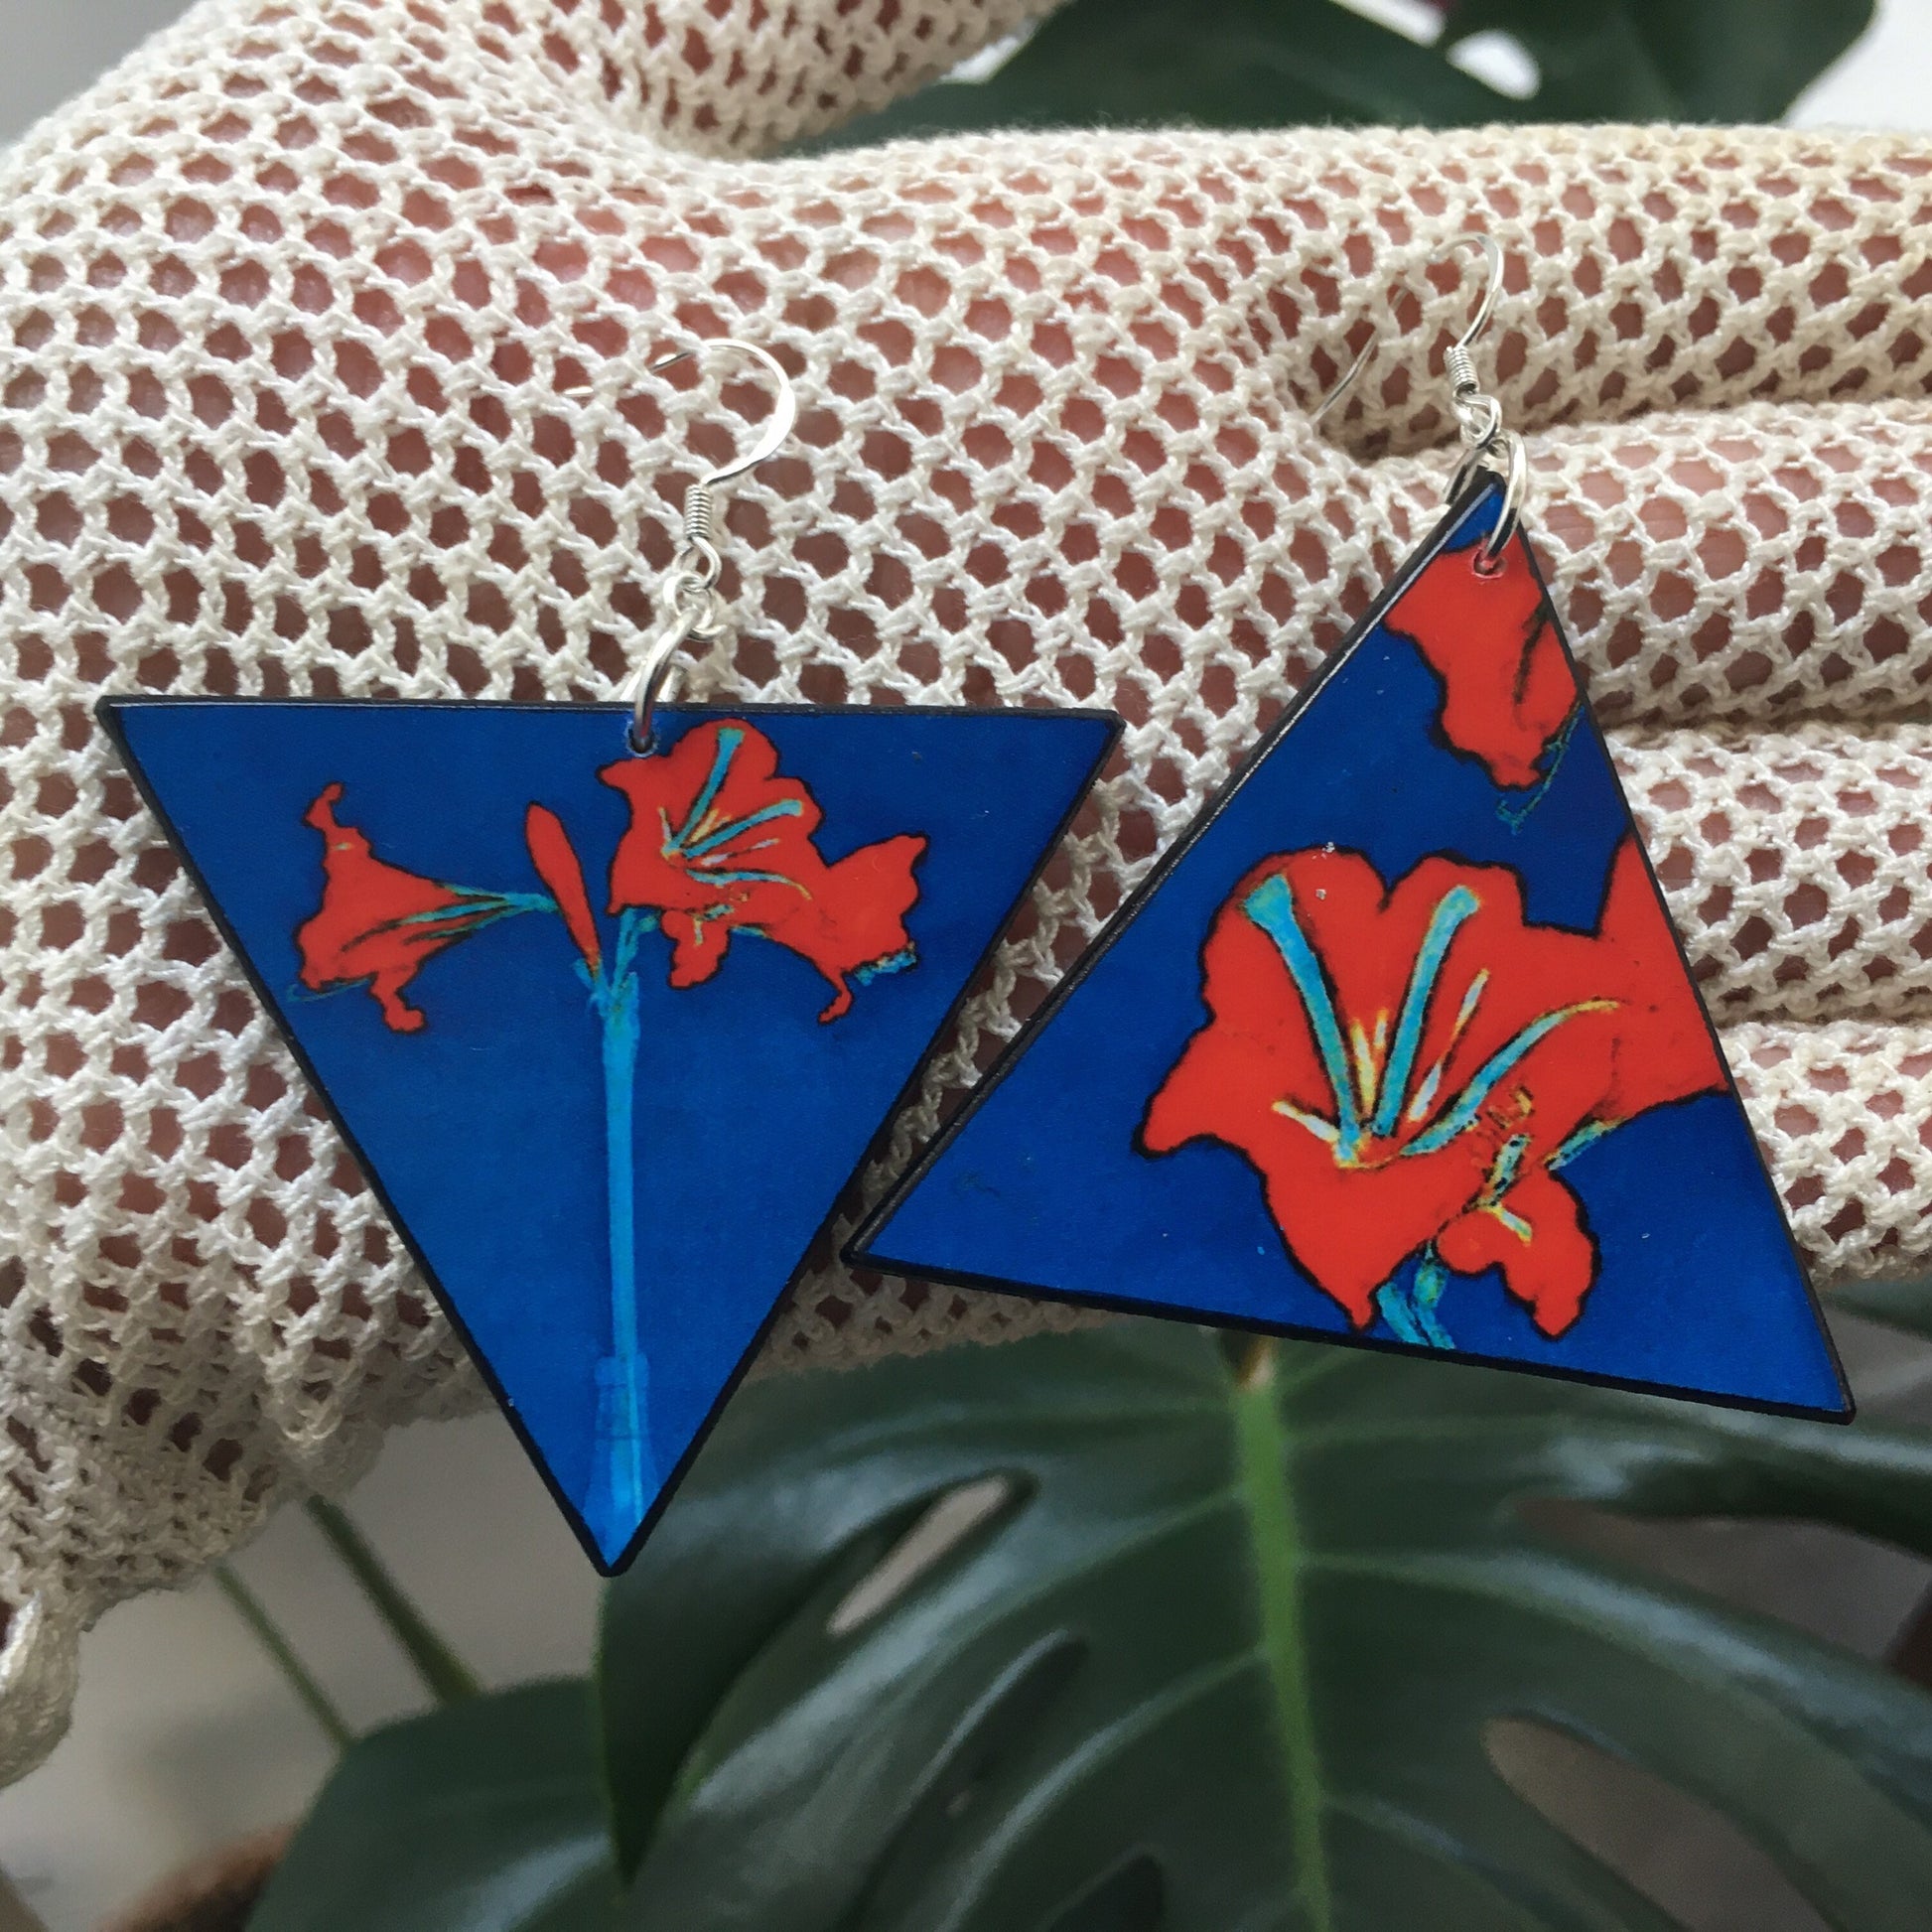 Triangle earrings with an art detail of Mondrian painting. Red flowers and blue color. Sustainable handmade earrings on wood by Obljewellery.